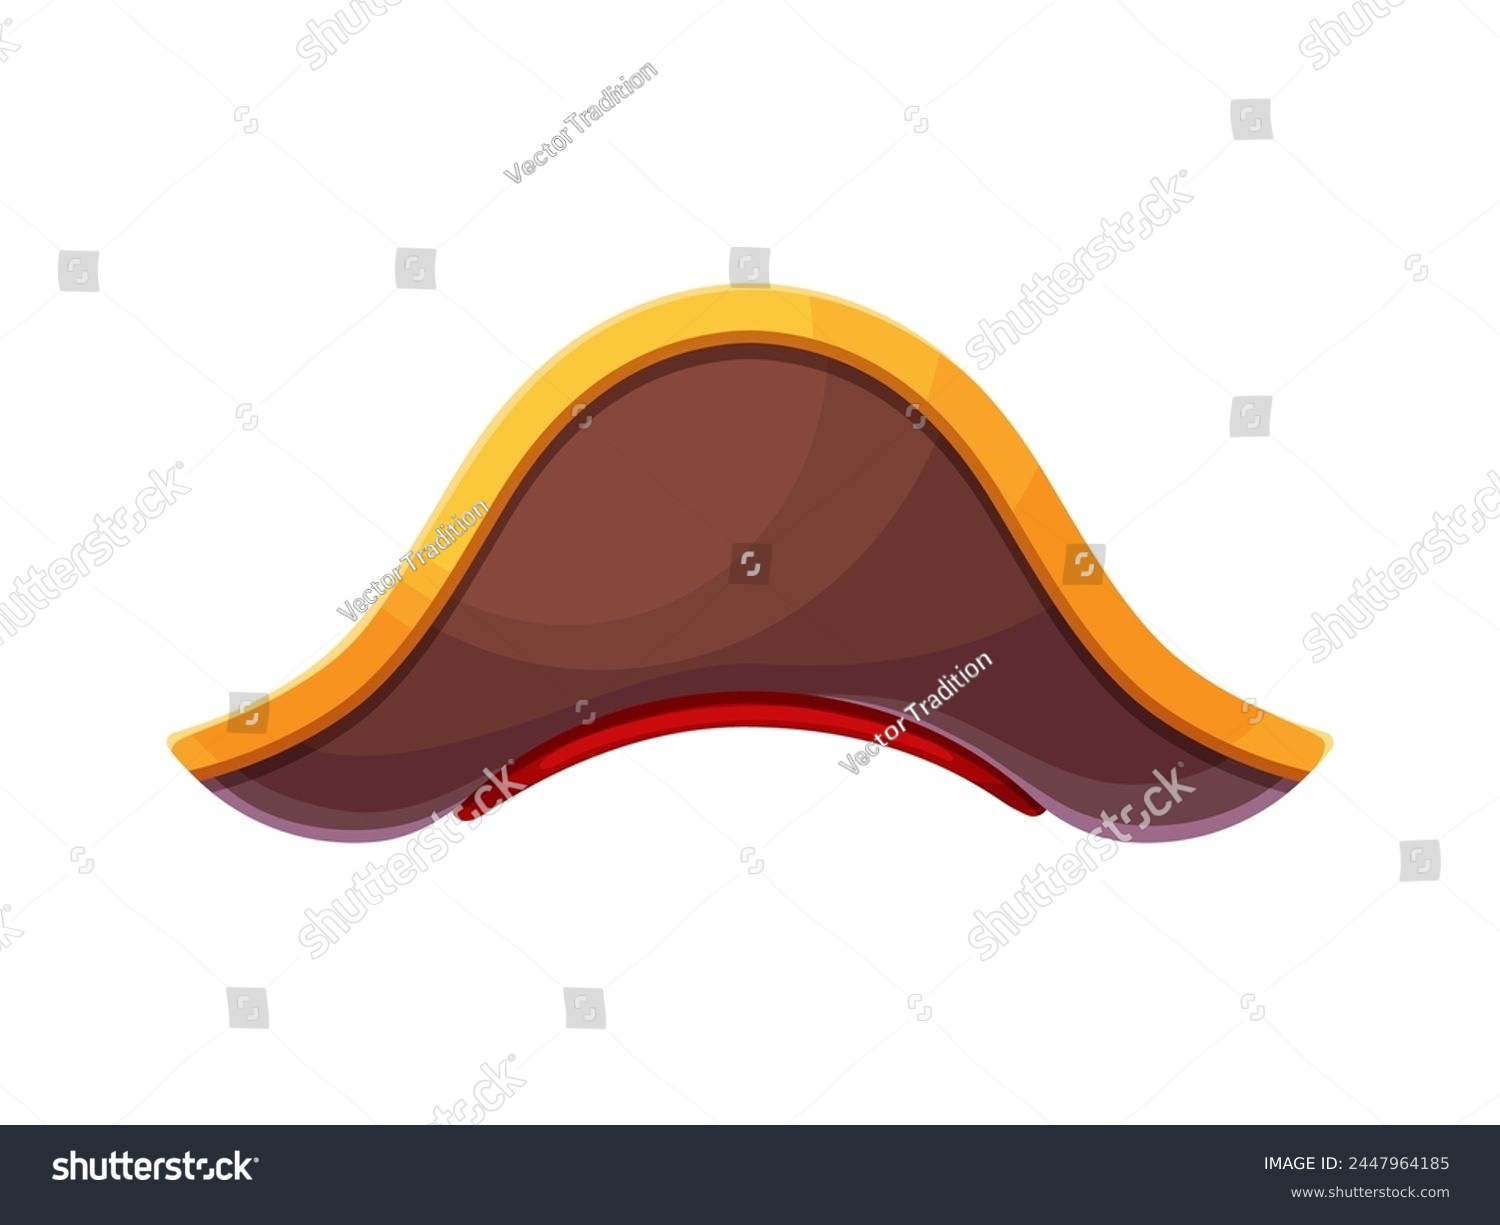 SVG of Pirate and corsair sailor captain tricorn hat. Cartoon carnival costume hat with crossbones emblem. Isolated vector buccaneer cocked cap with wide brim turned up at the sides. Caribbean rover headwear svg